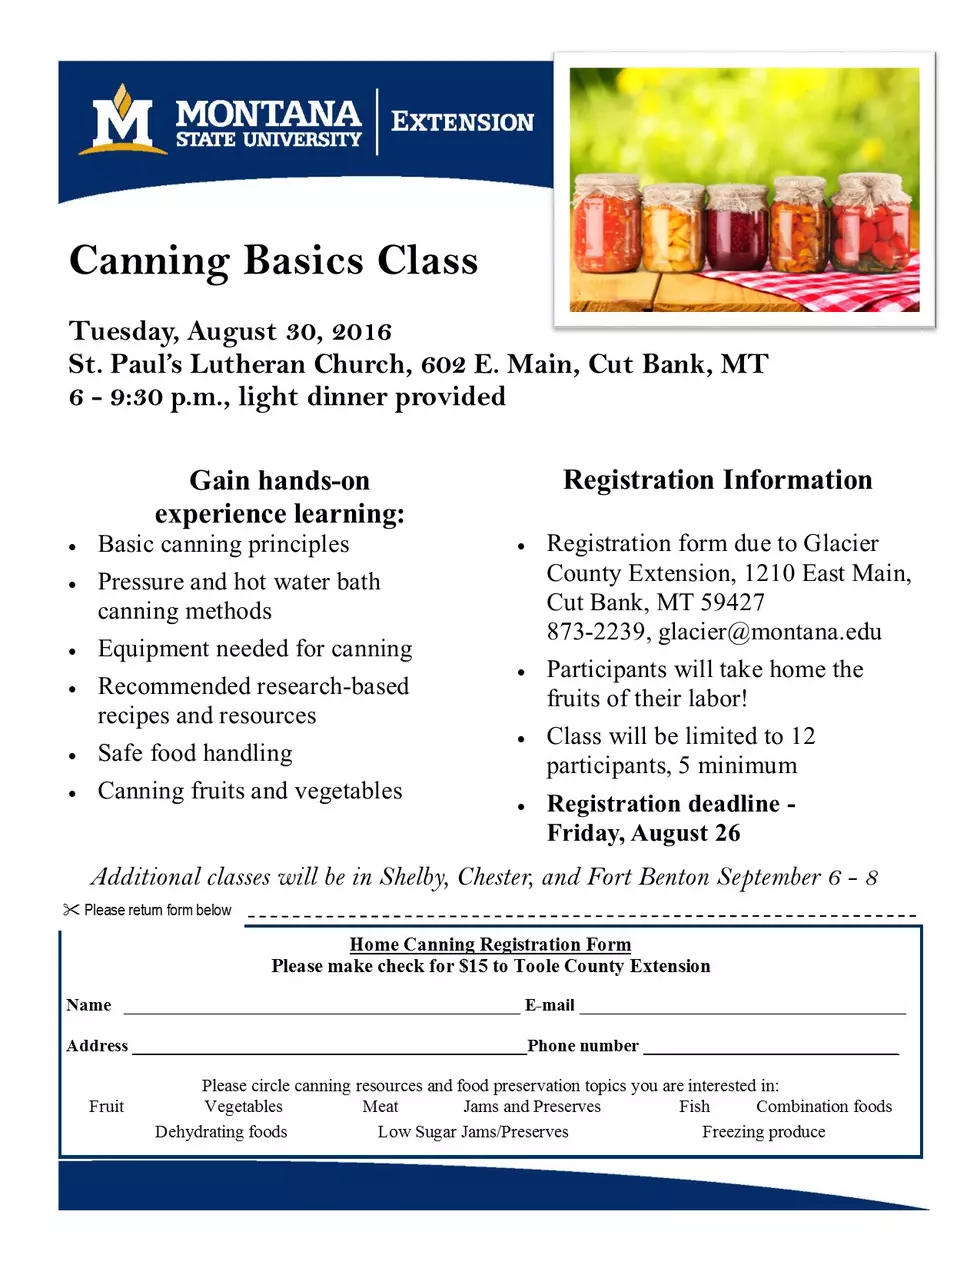 MSU Extension Offers Training in Home Canning